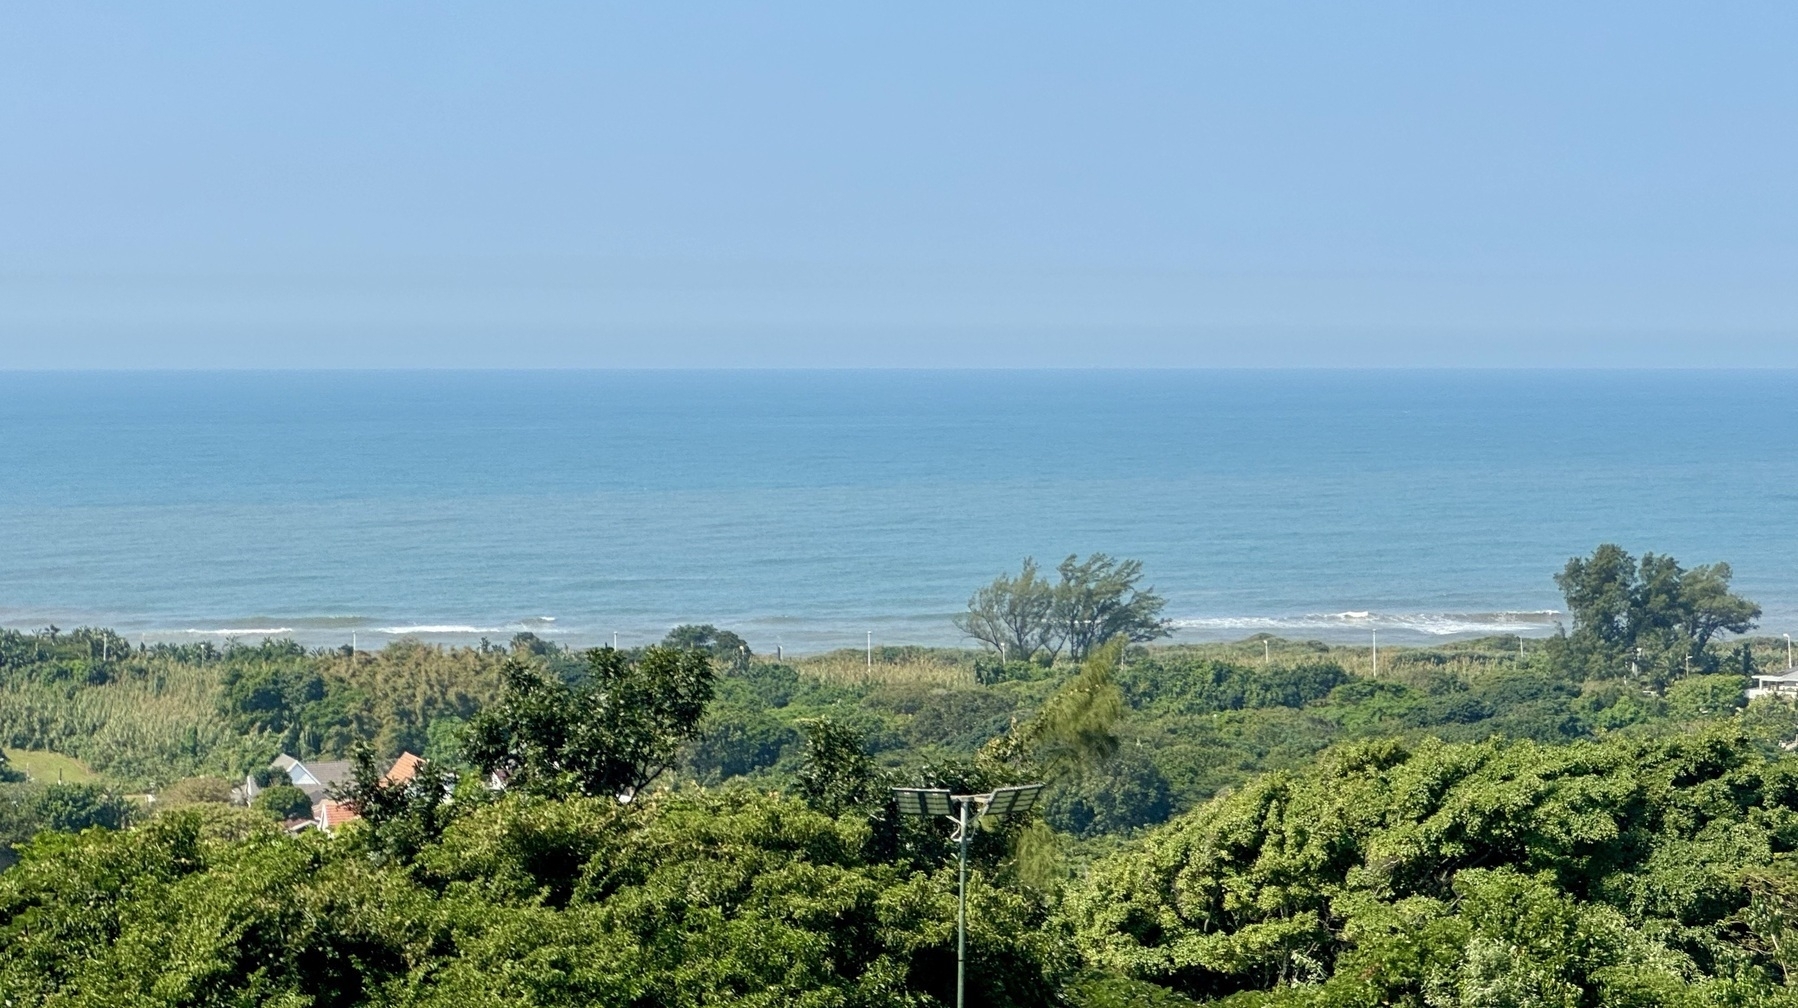 A view of the ocean with blue sky above and green trees below.